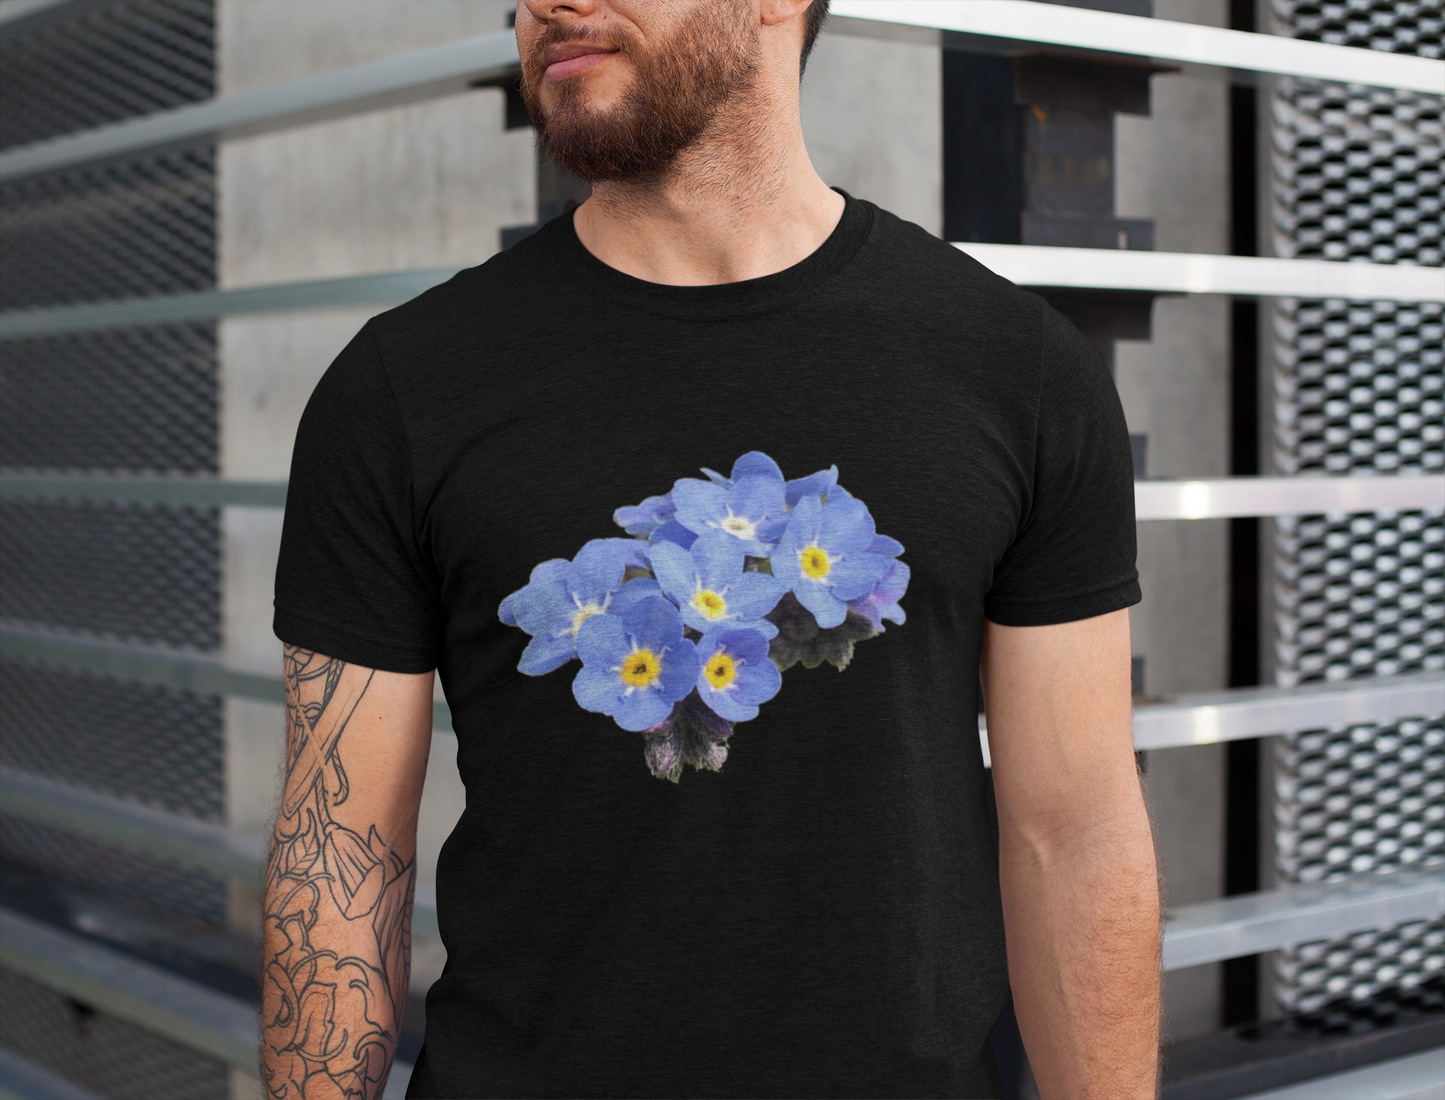 Forget me Nots T-Shirt